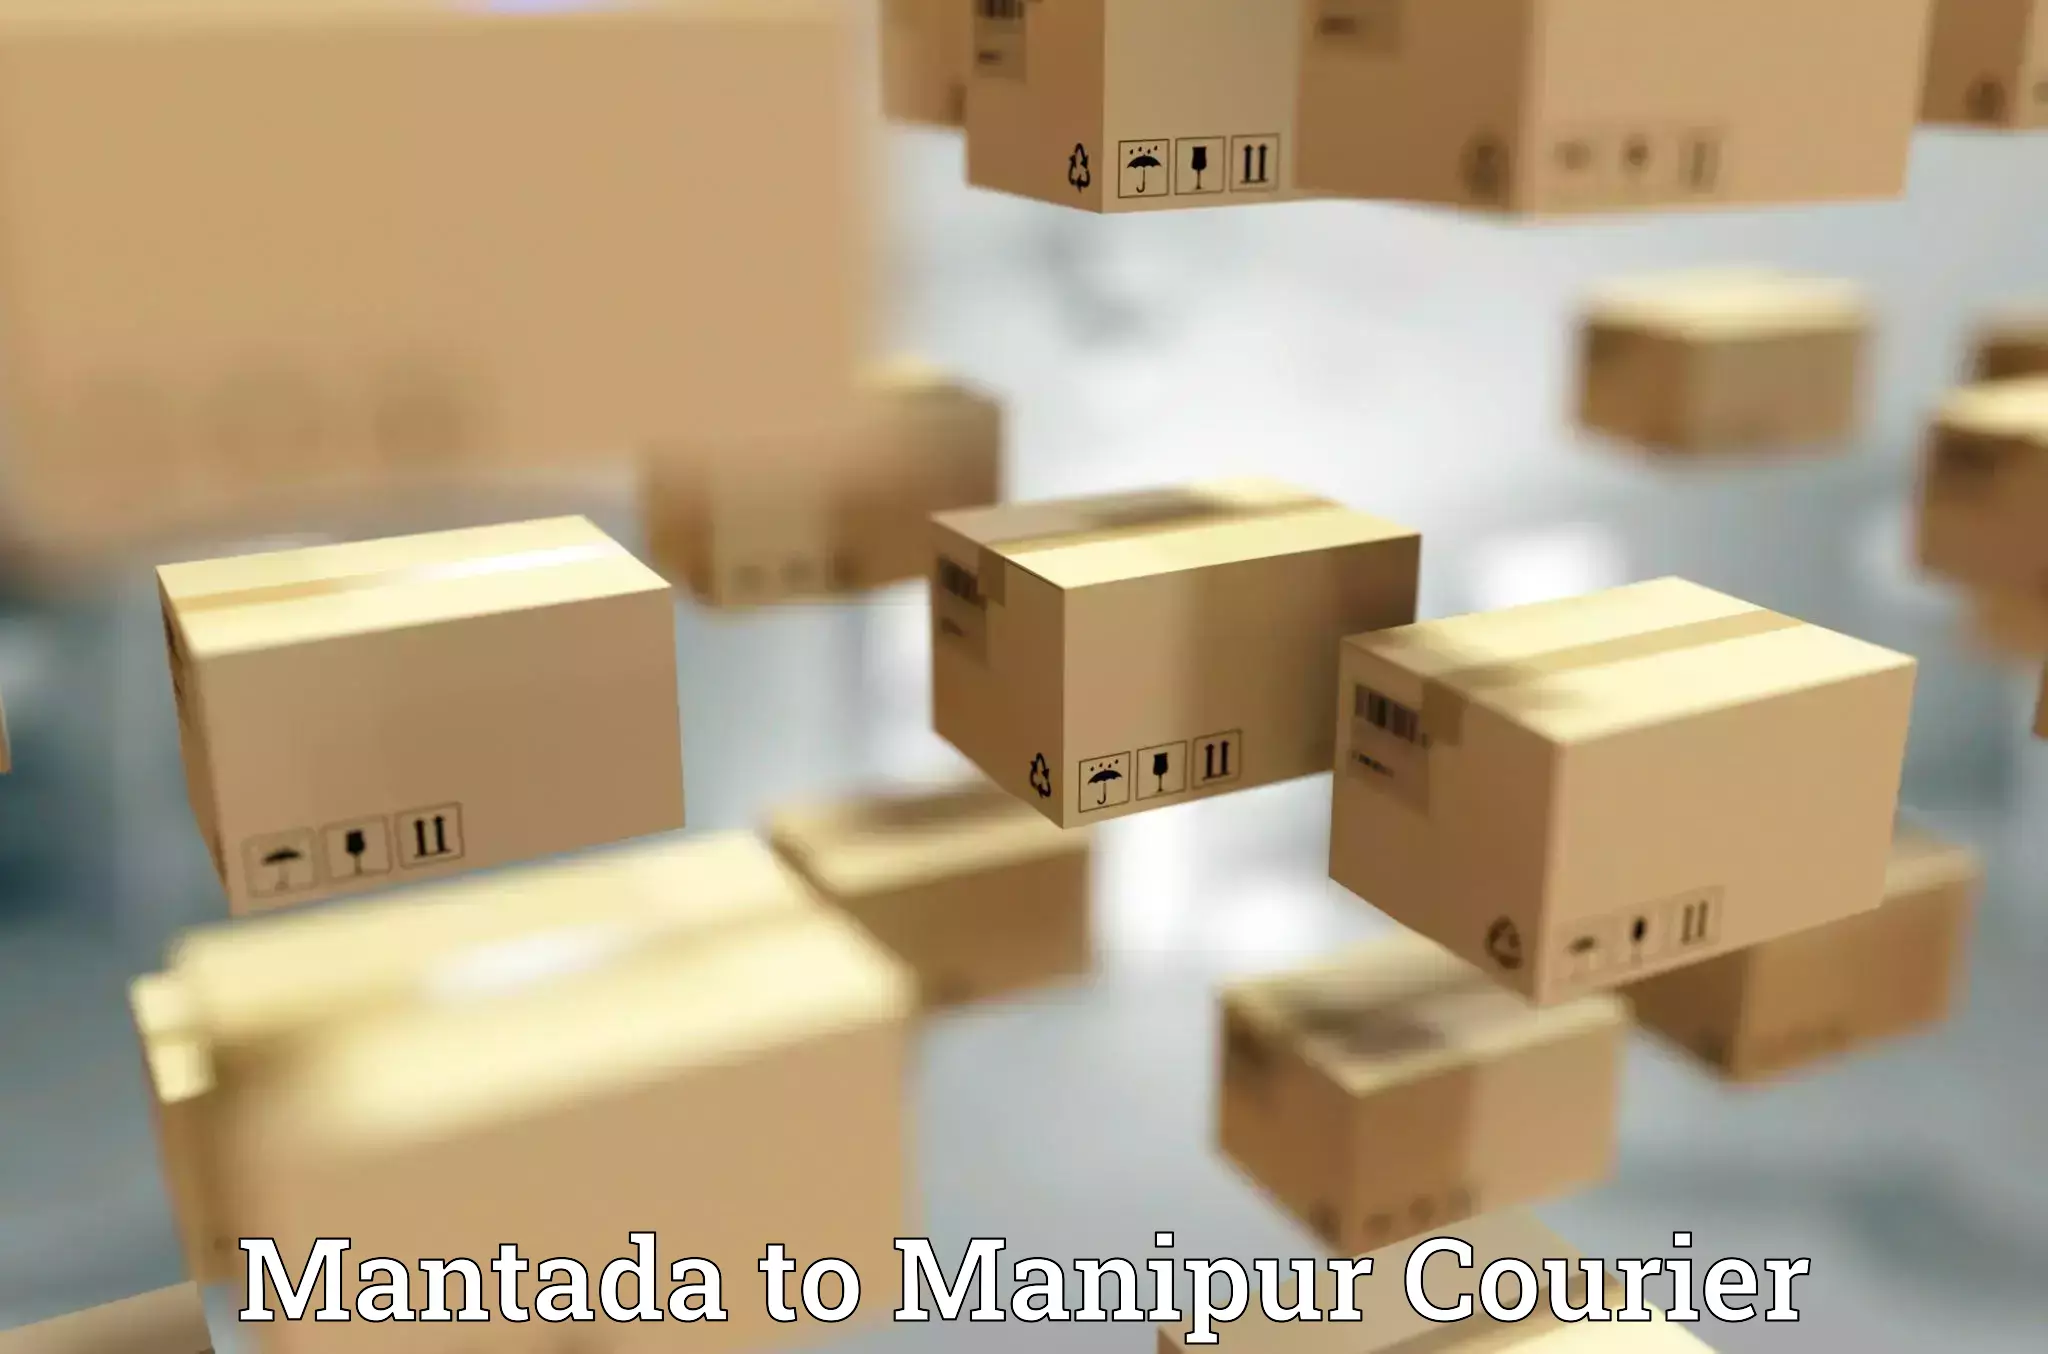 Modern courier technology Mantada to Manipur